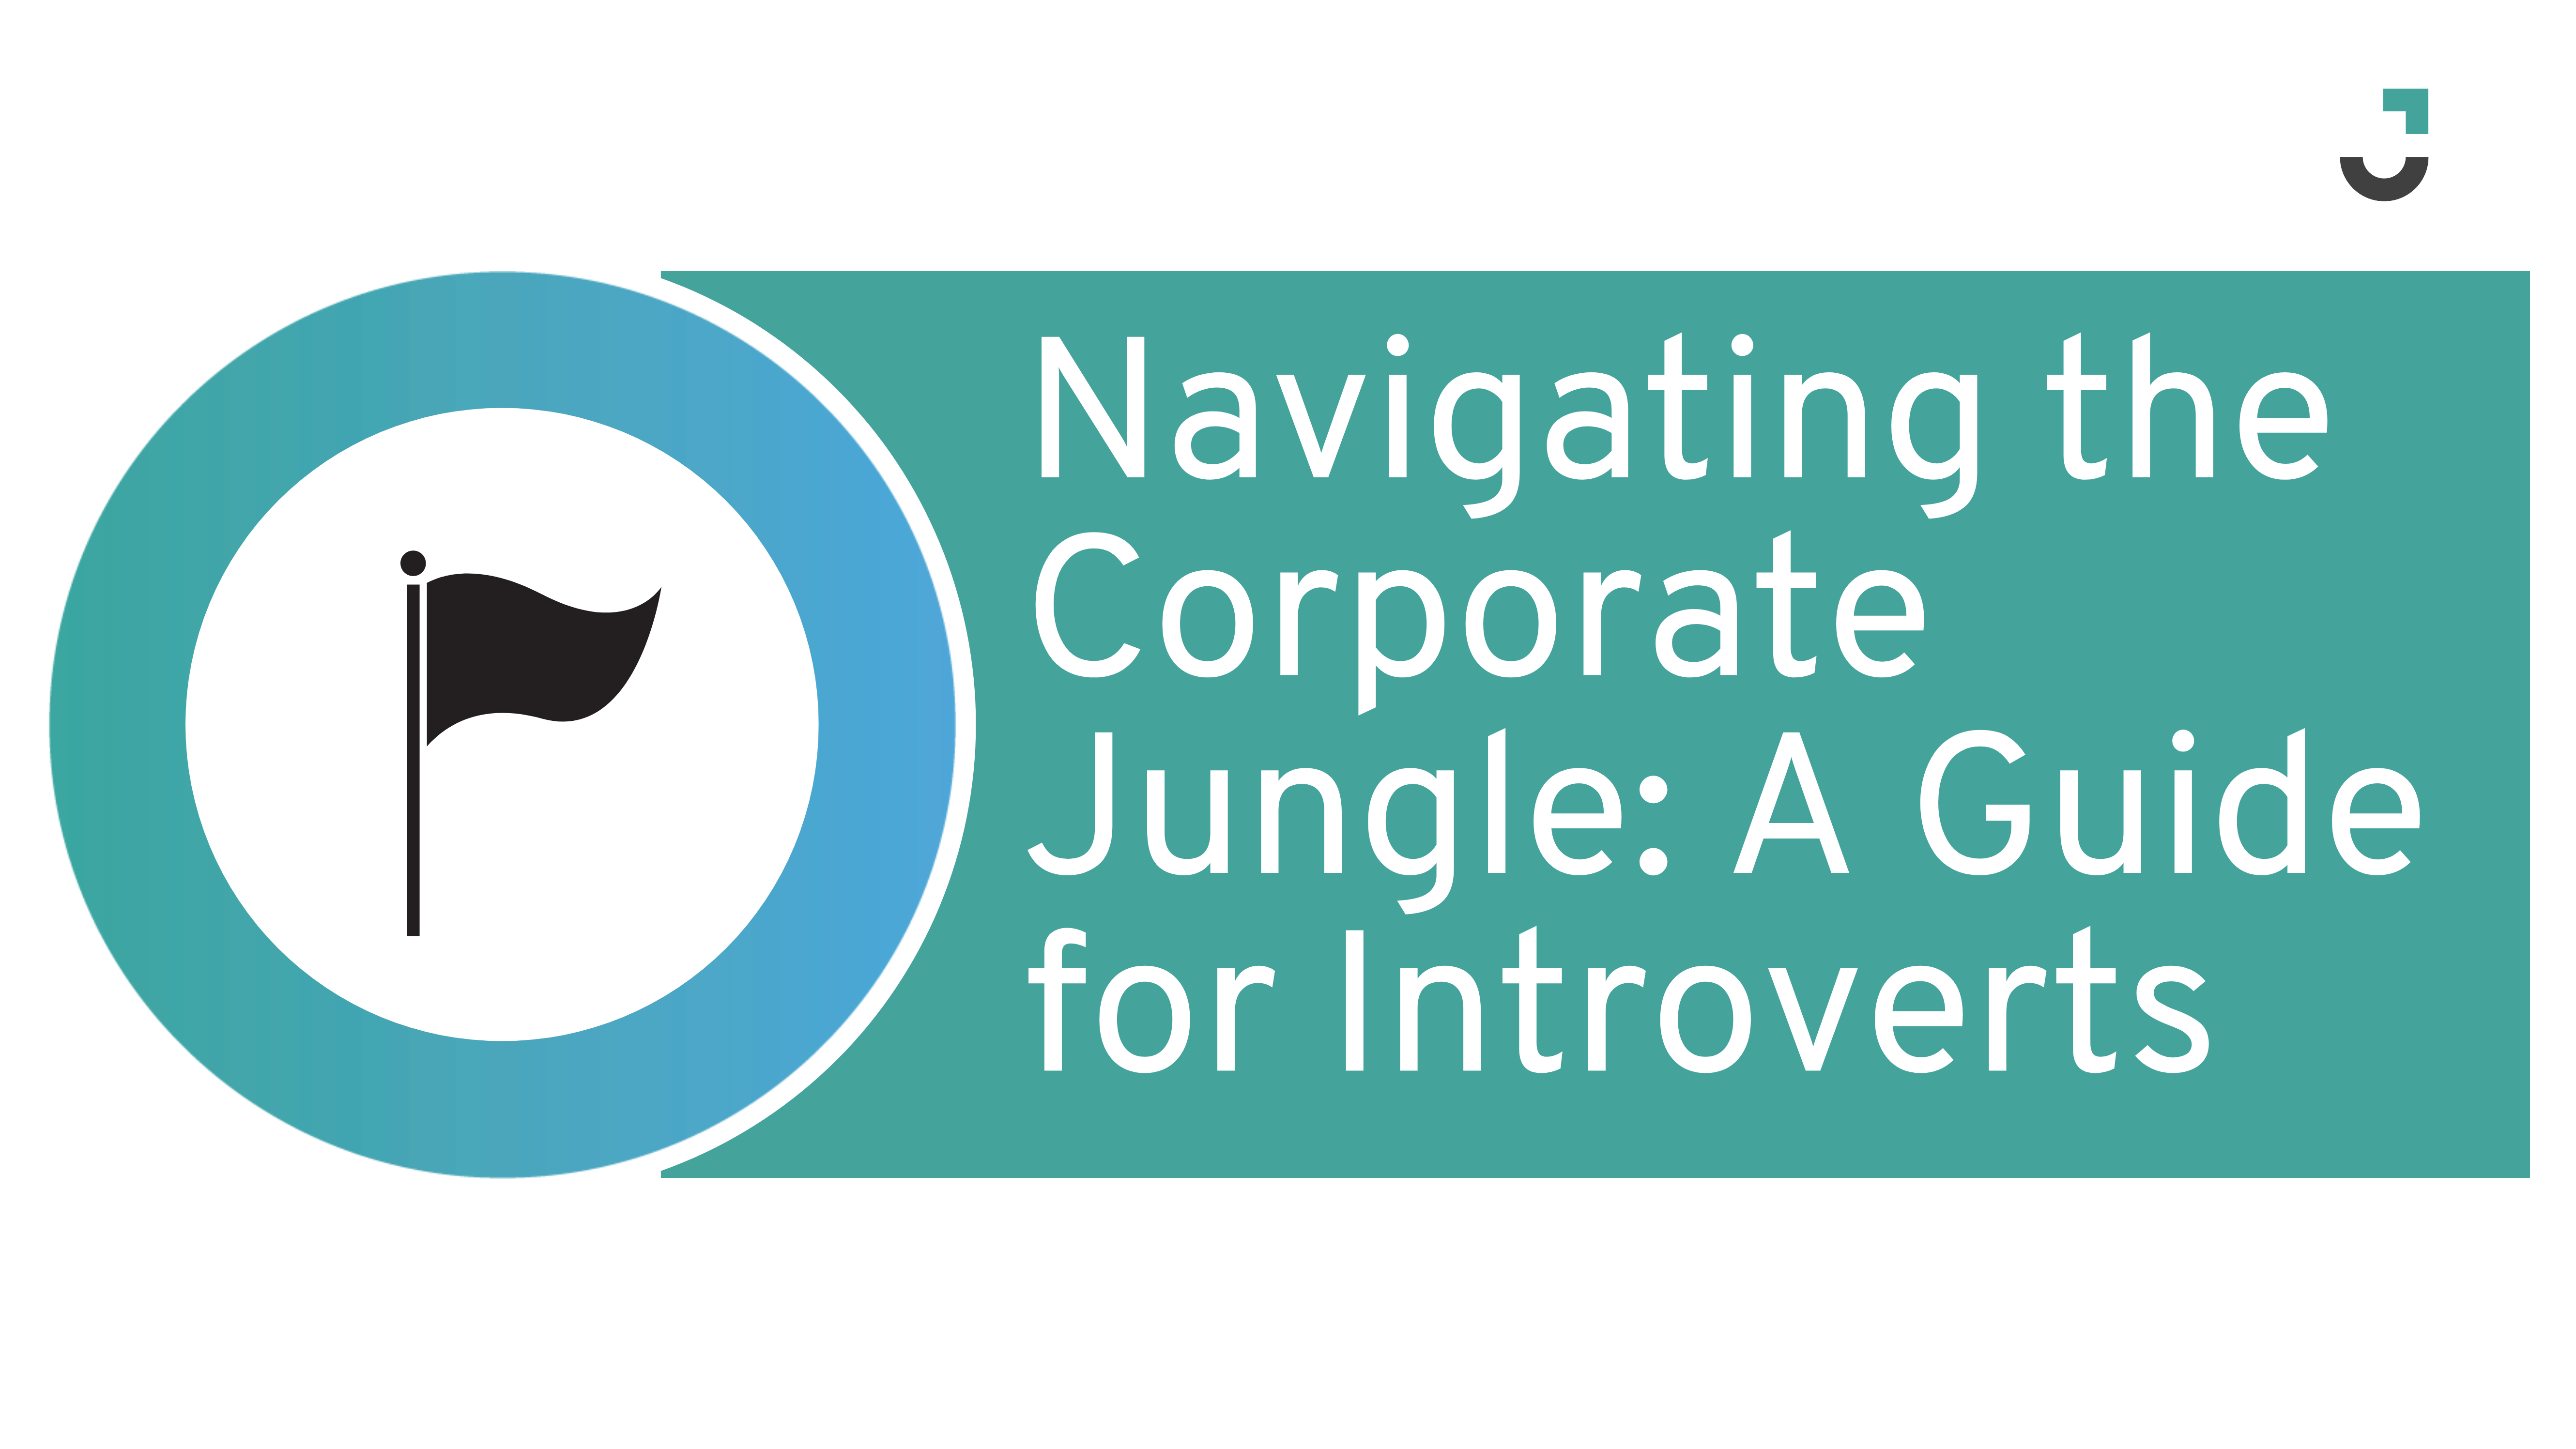 Navigating the Corporate Jungle: A Guide for Introverts